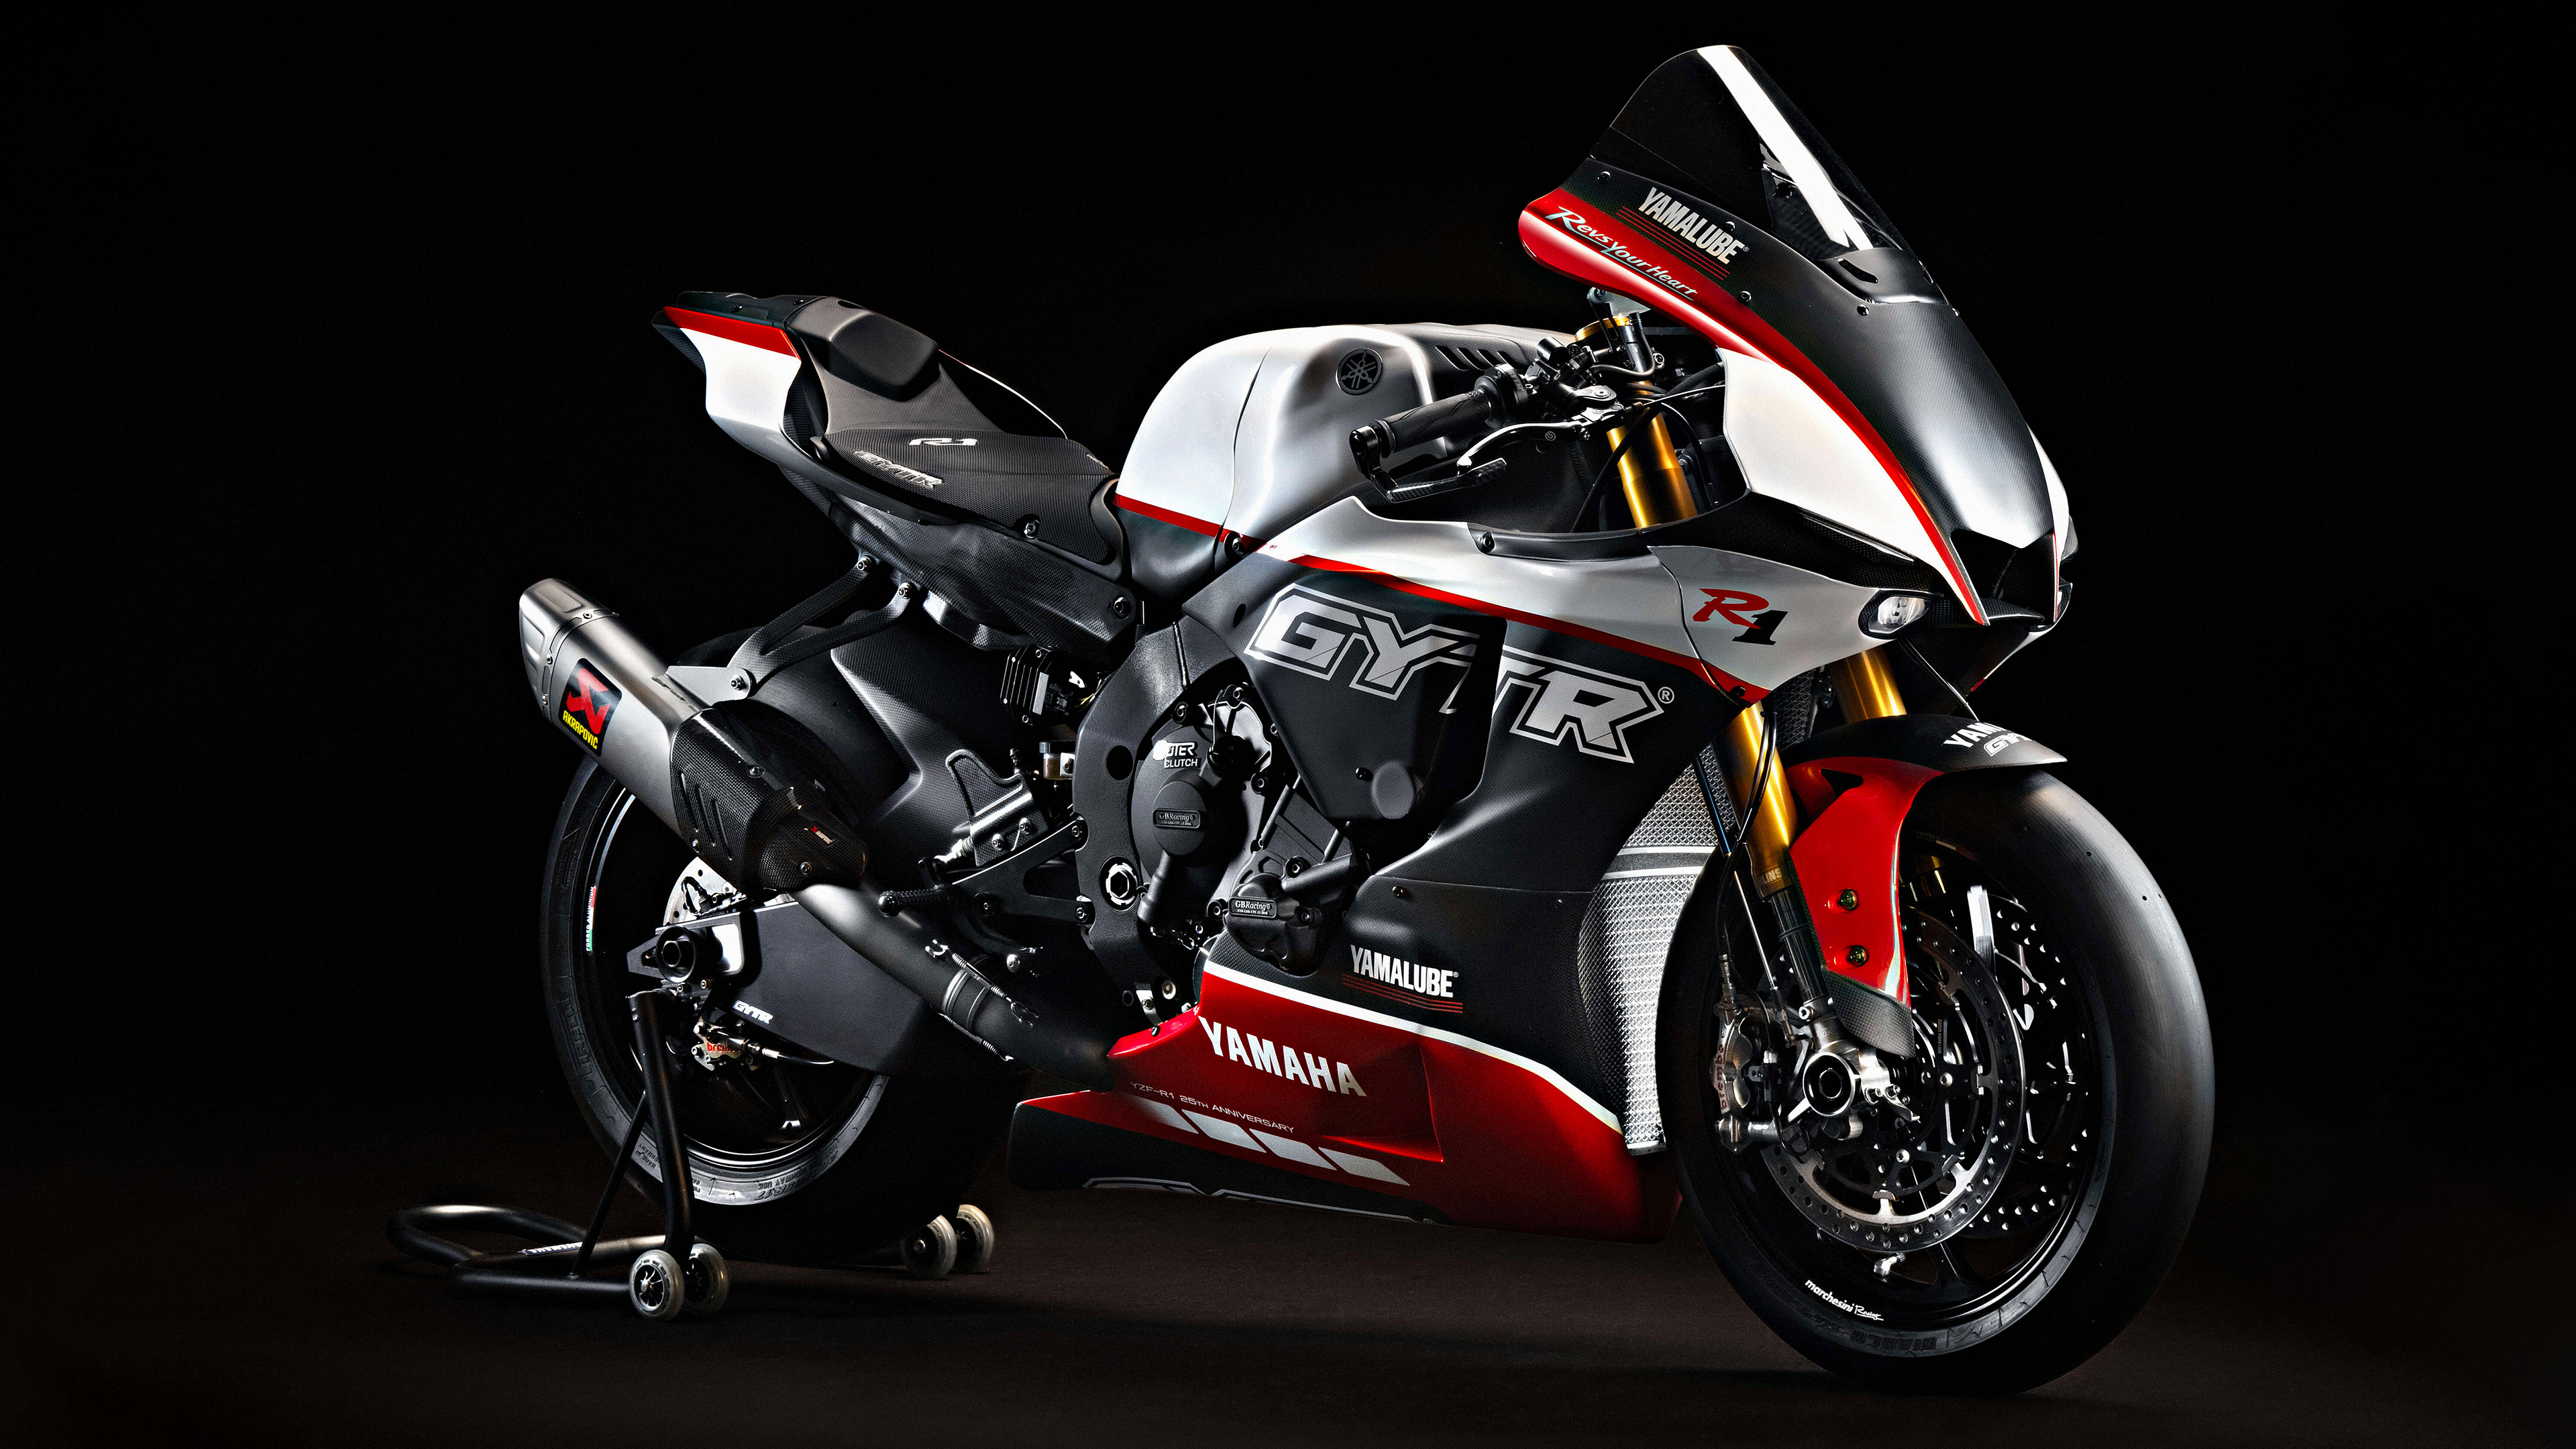 Yamaha motorcycle for the 25th anniversary